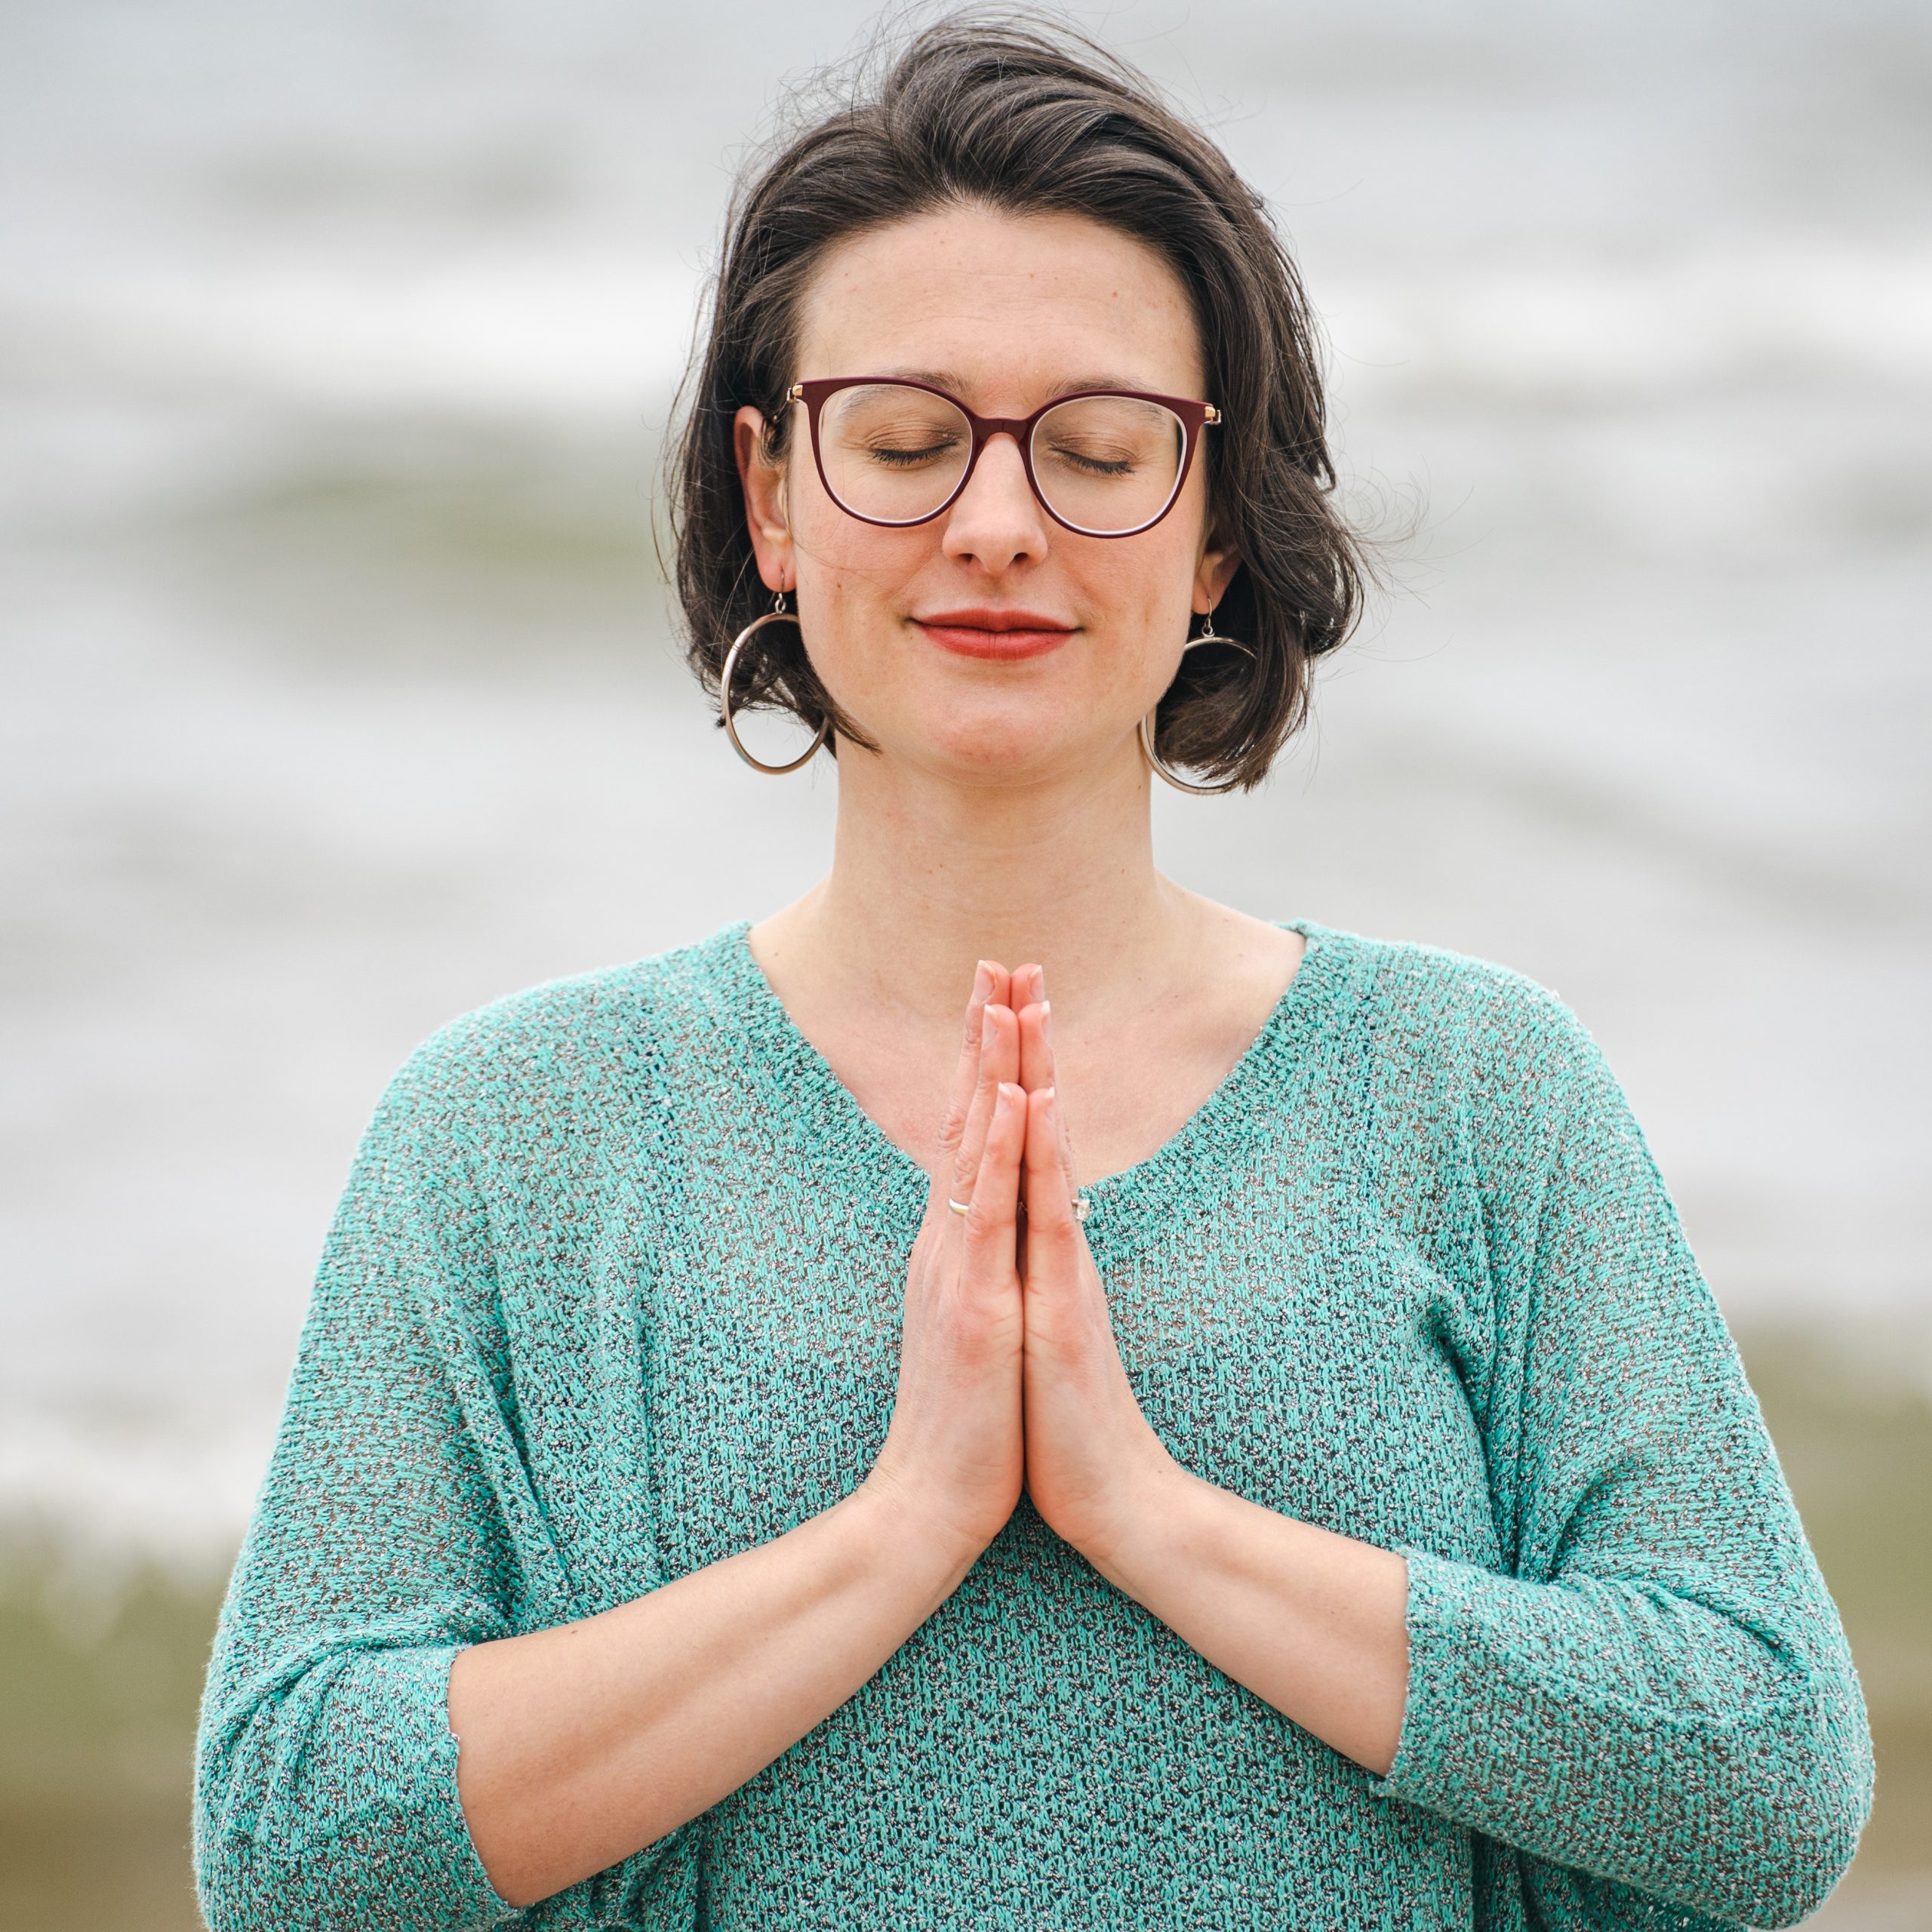 Carli Watson with hands in prayer pose during online somatic coaching